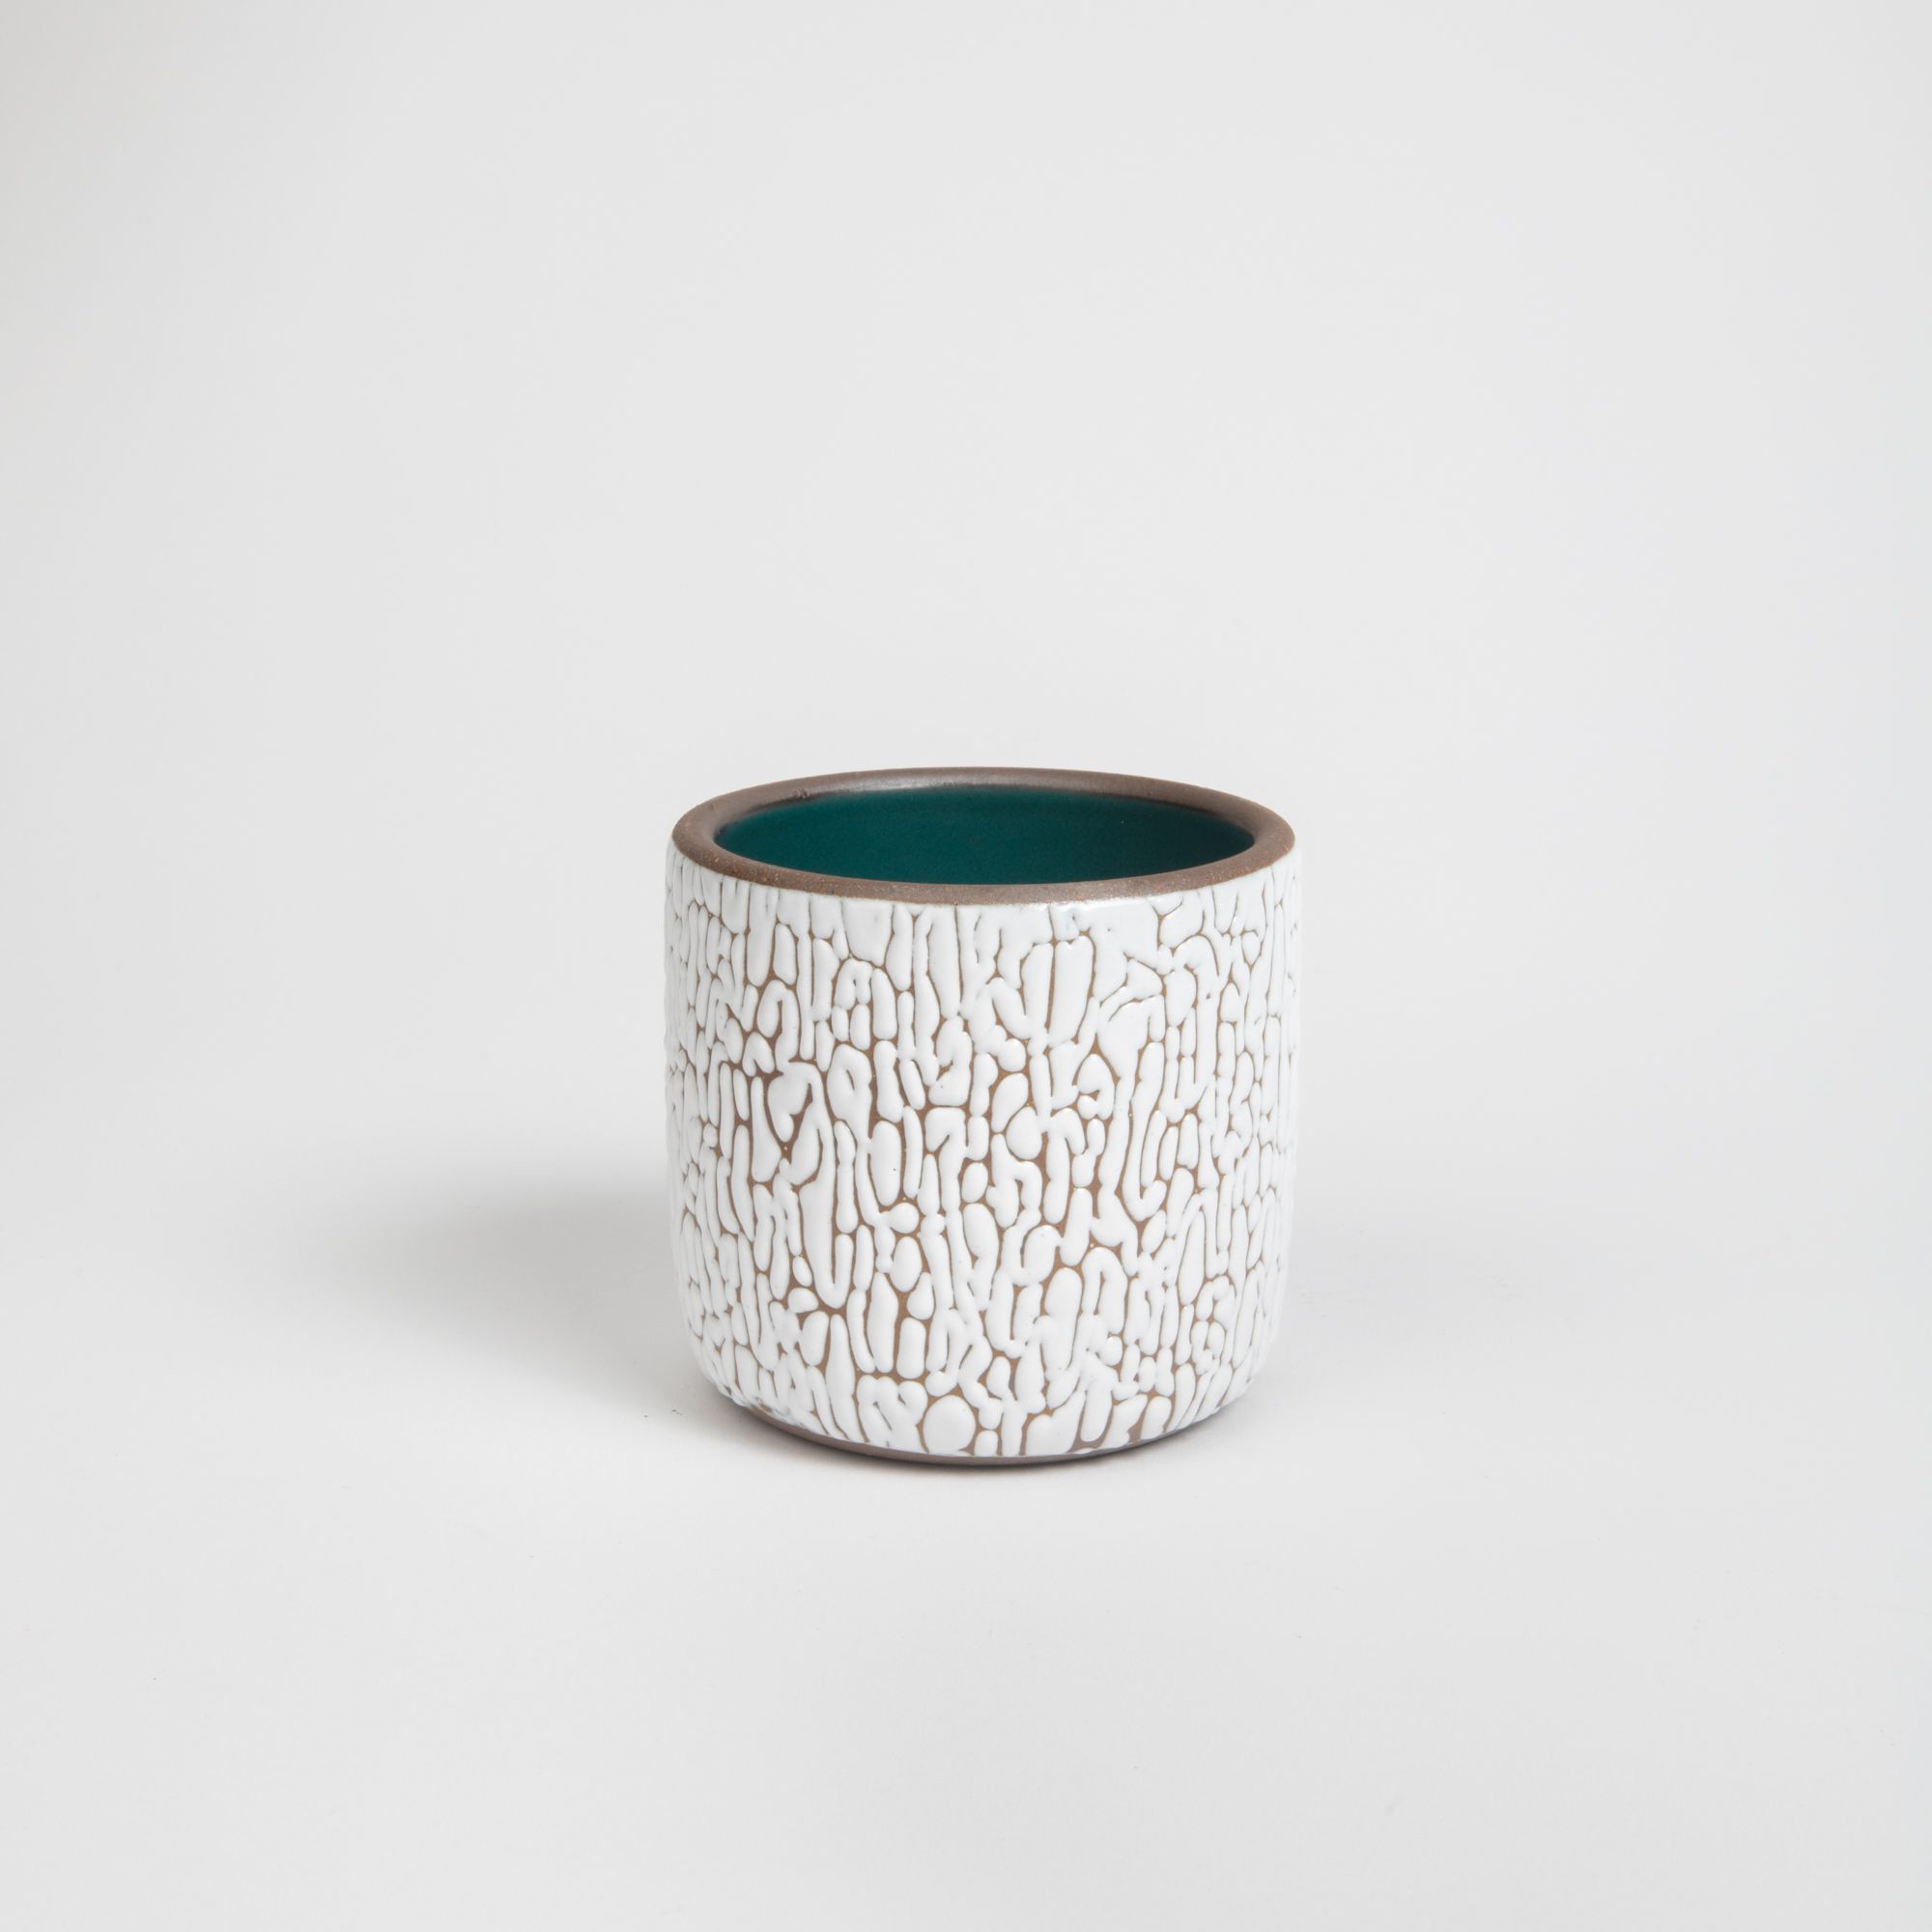 A short white ceramic vessel with cracked texture and the interior being dark teal